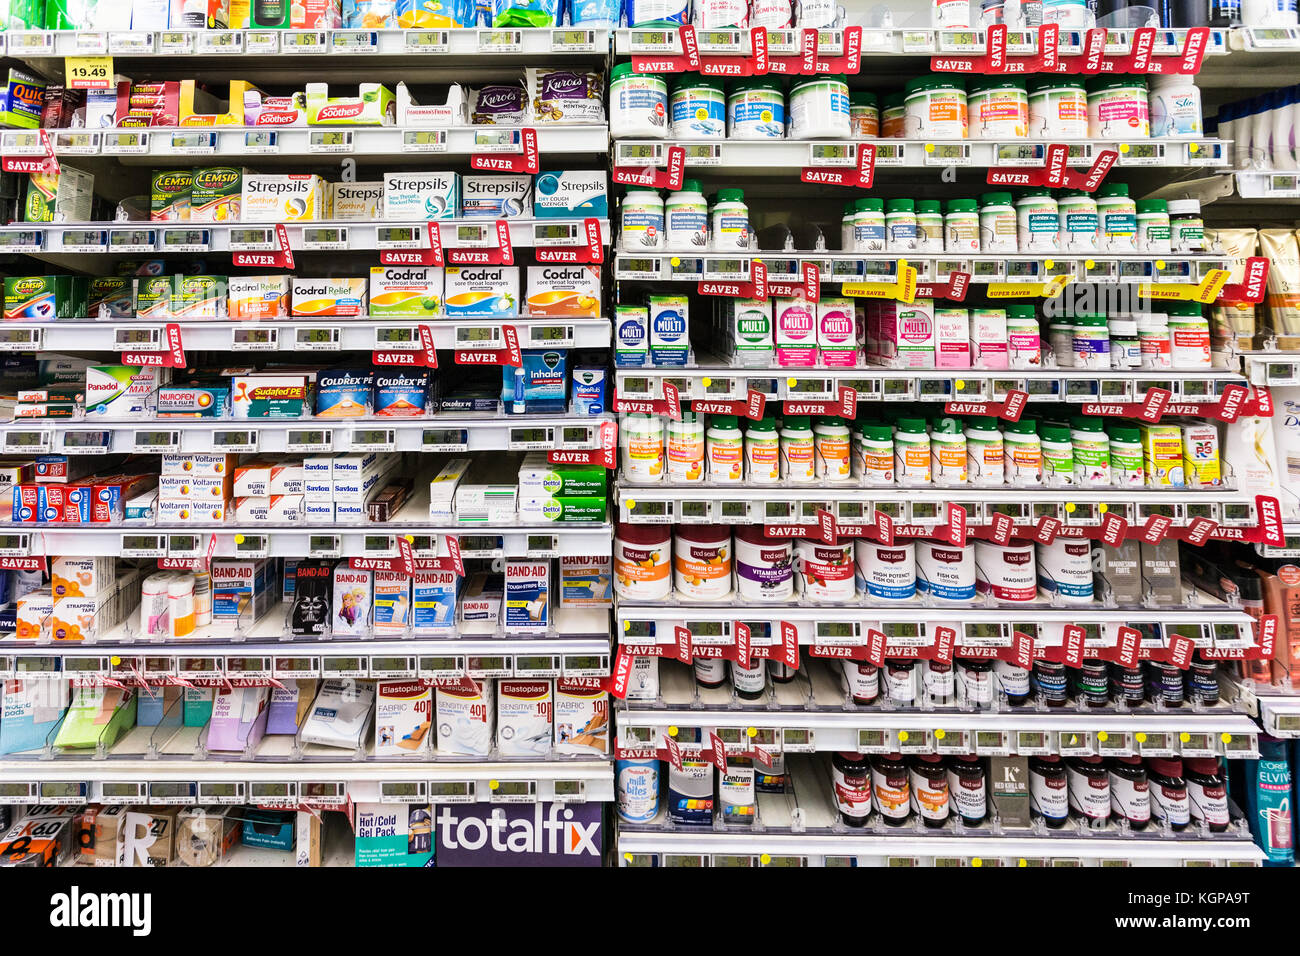 WELLINGTON, NEW ZEALAND - MARCH 1, 2017: Flu and general pain drugs and supplements are displayed in a supermarket in Wellingtion in New Zealand capit Stock Photo